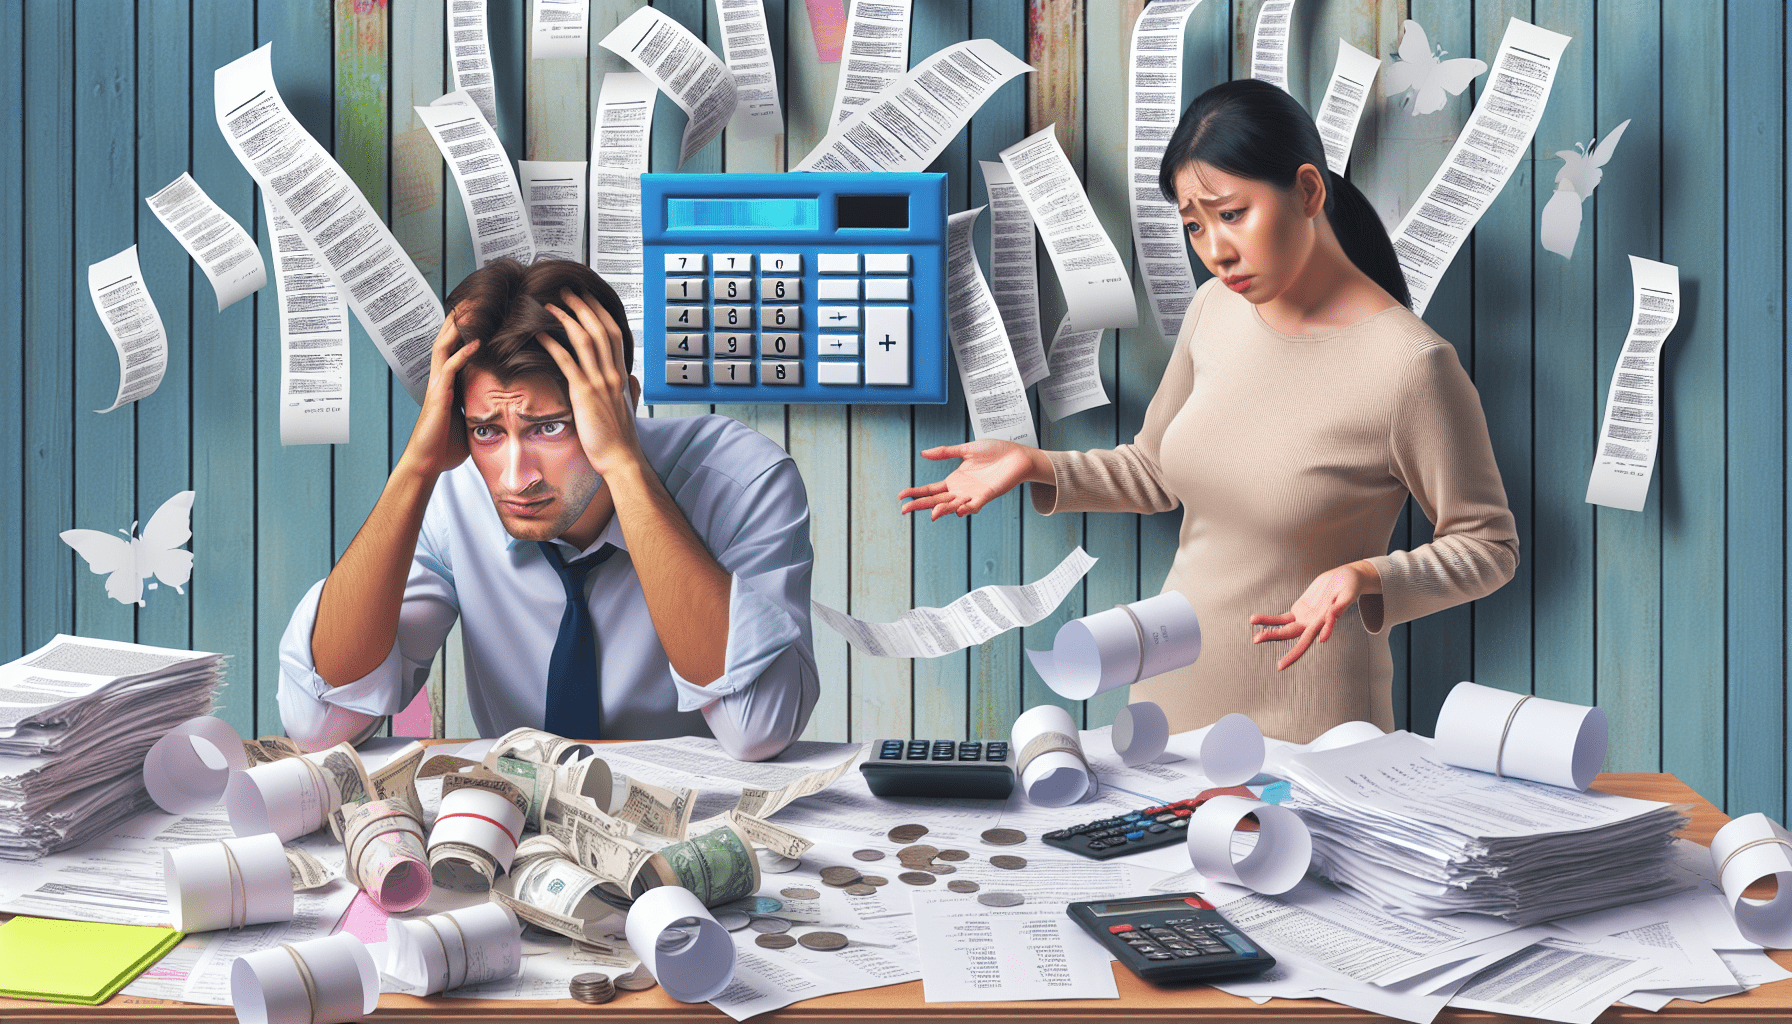 A photorealistic image of a frustrated person surrounded by receipts and financial papers with a QuickBooks logo hovering above them.